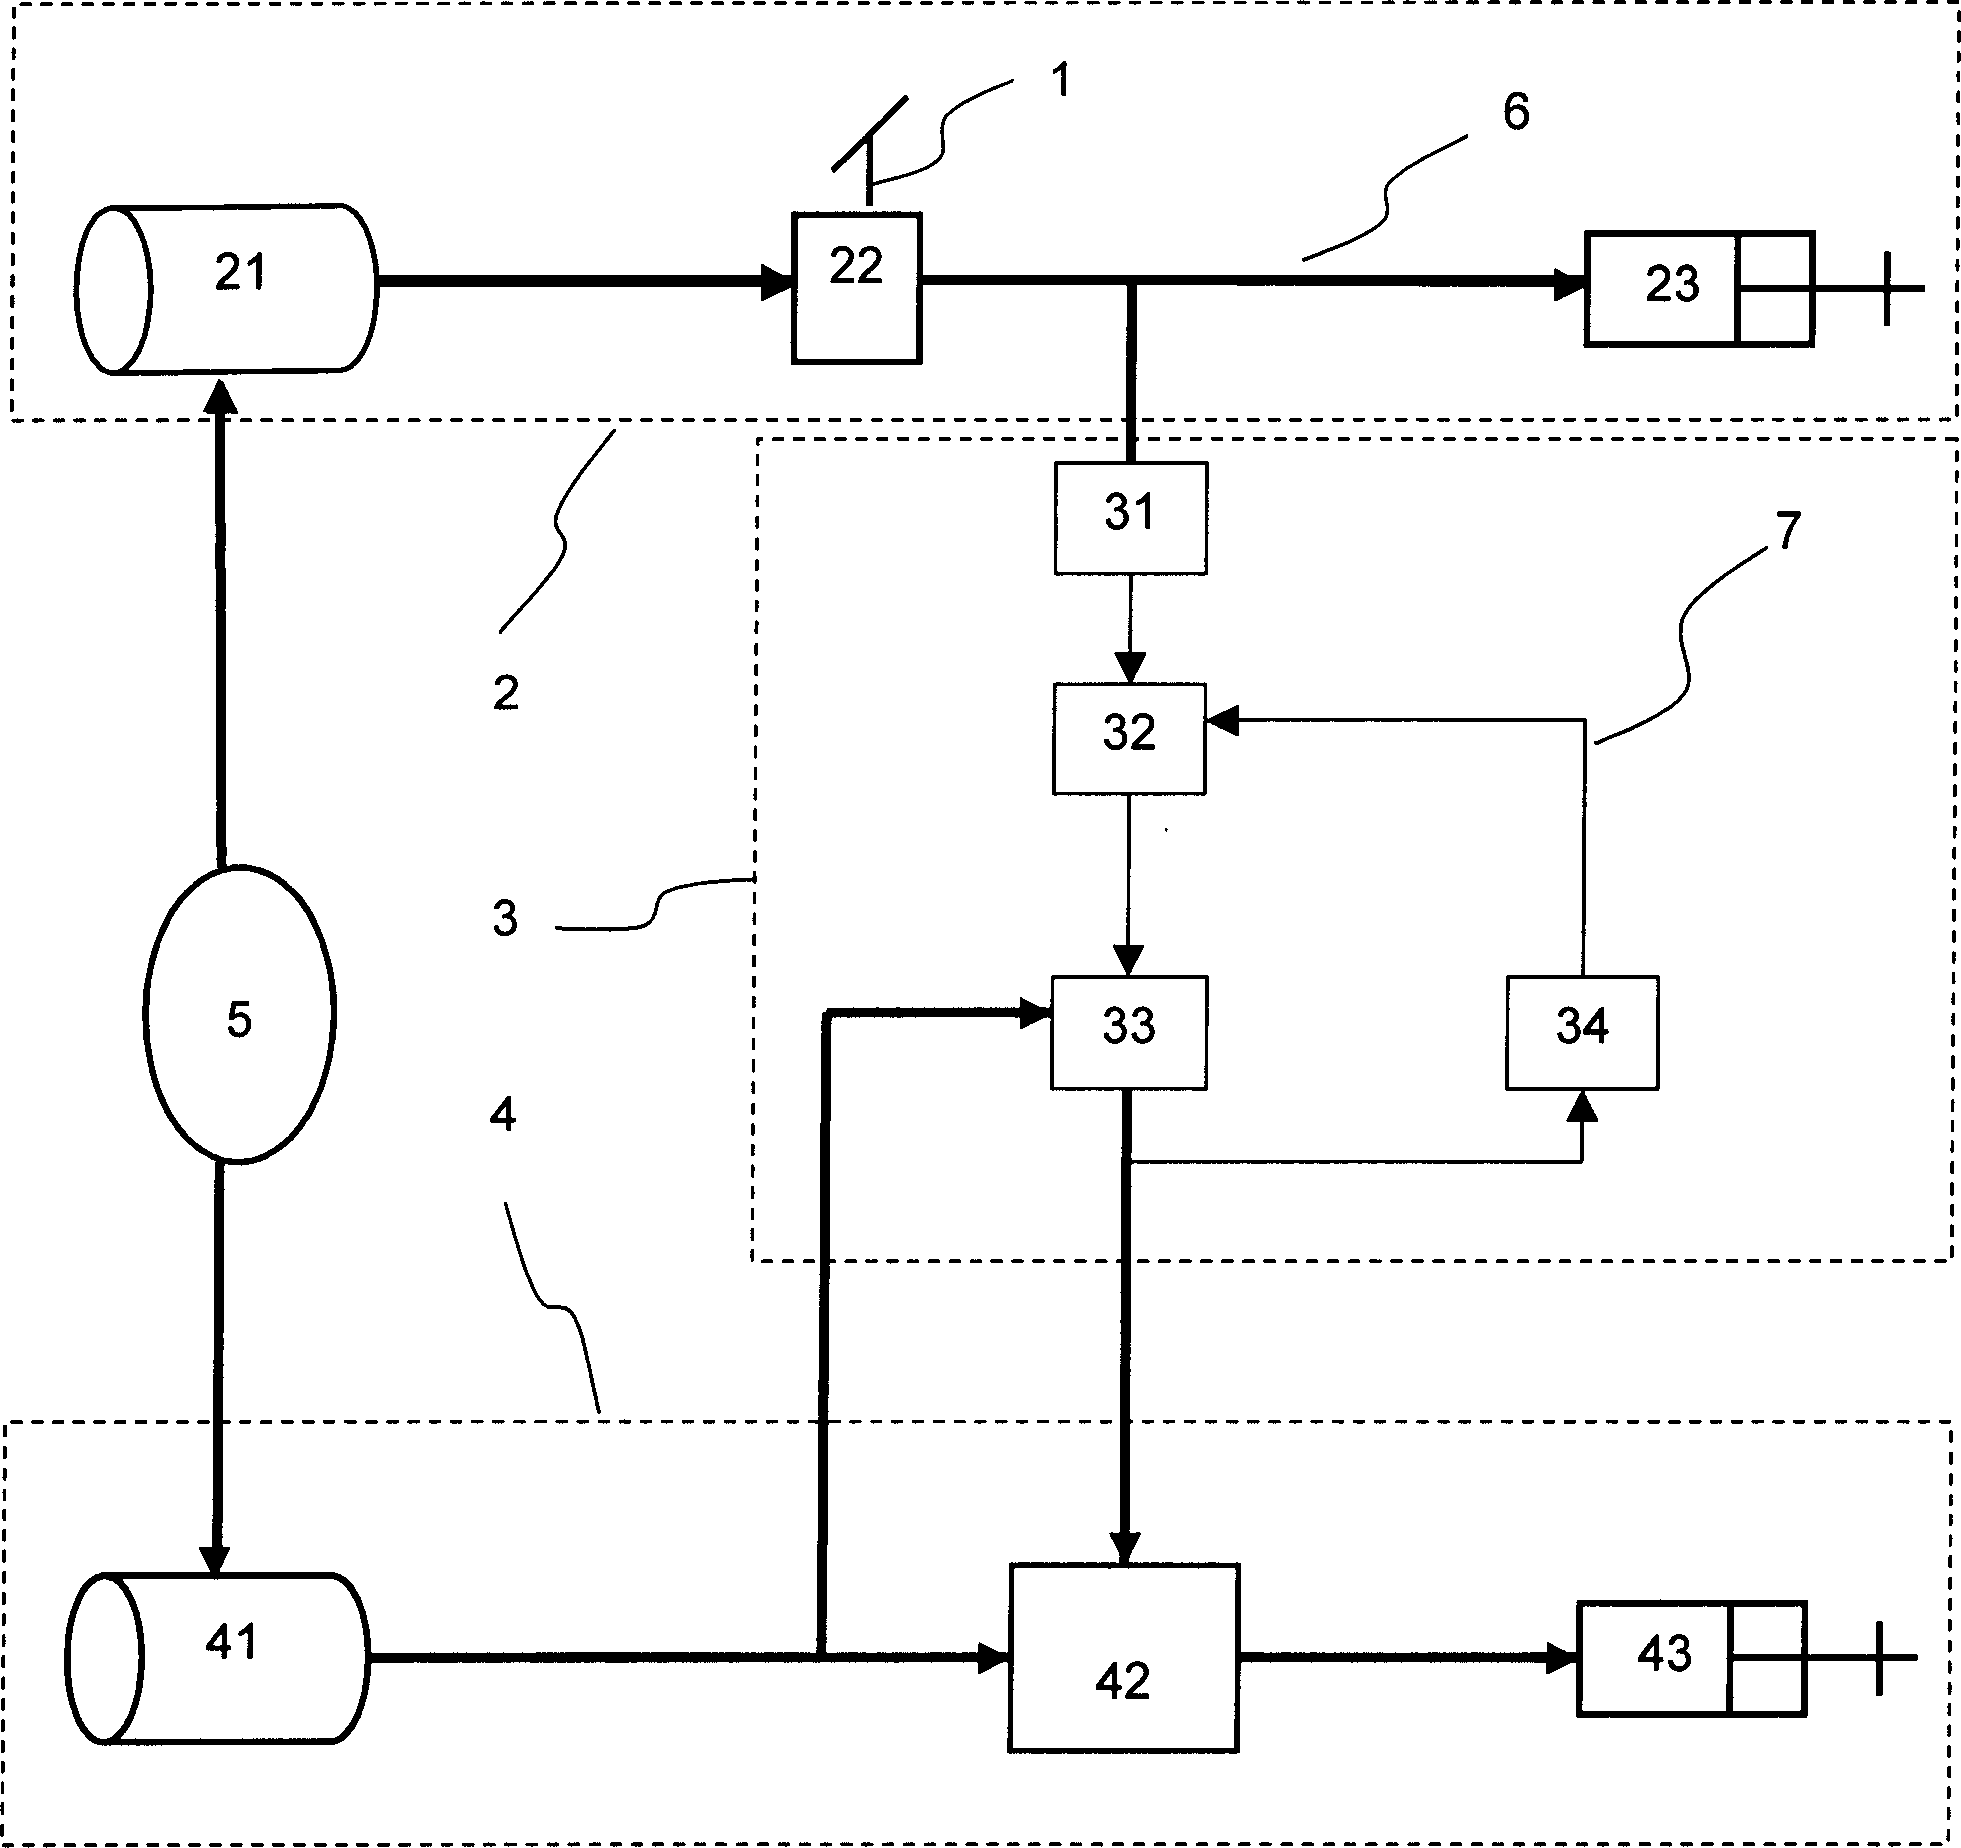 Synchronous air brake system controlled by voltage